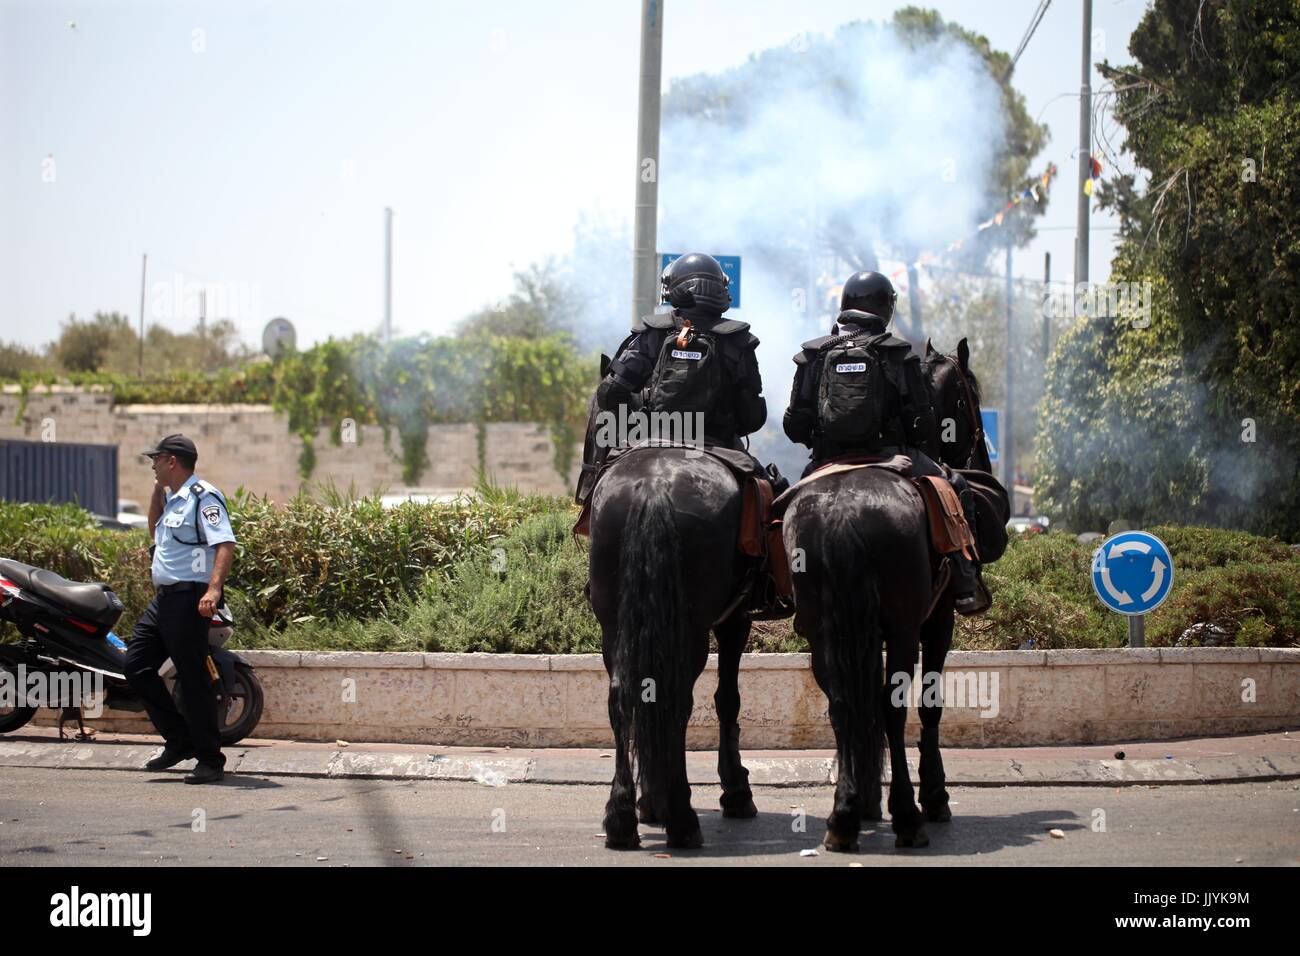 Jerusalem, Jerusalem, Palestinian Territory. 20th Aug, 2017. Horse mounted Israeli security forces patrol during clashes with Palestinian protesters following Friday prayer outside Jerusalem's Old City on July 21, 2017, after Israeli police barred men under 50 from entering the Old City for Friday Muslim prayers as tensions rose and protests erupted over new security measures at the highly sensitive Al-Aqsa mosque compound. The ban came after Israeli ministers decided not to order the removal of metal detectors erected at entrances to the Al-Aqsa mosque compound, known to Jews as the Temple Stock Photo